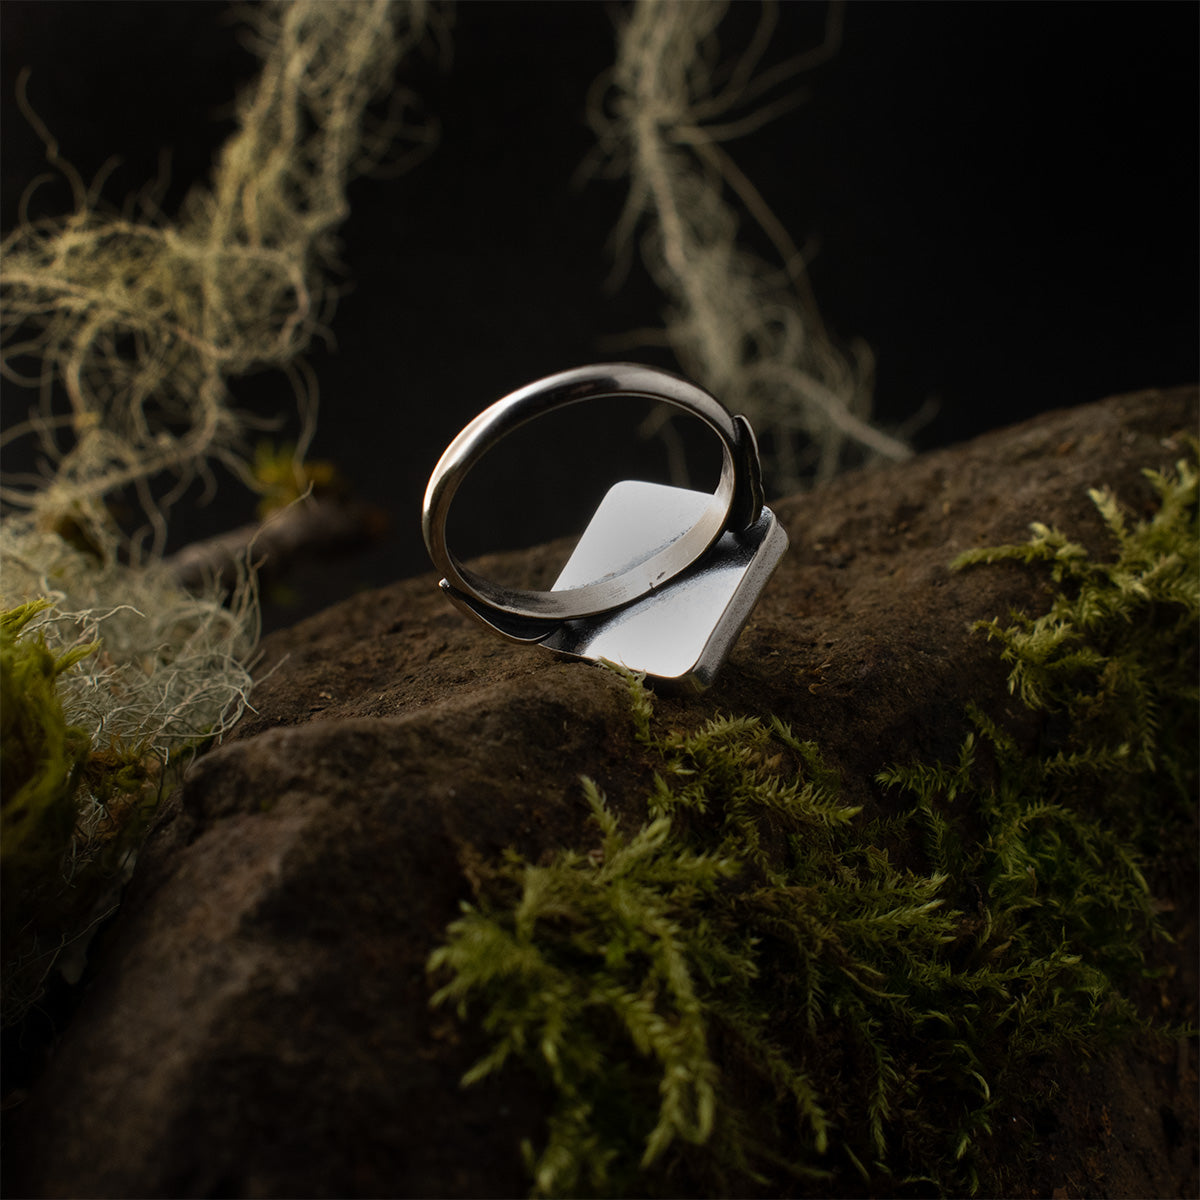 Underneath the Aventurine Pyramid Double Leaf Ring, showing its polished diamond-shaped setting and its simple handmade sterling silver band.